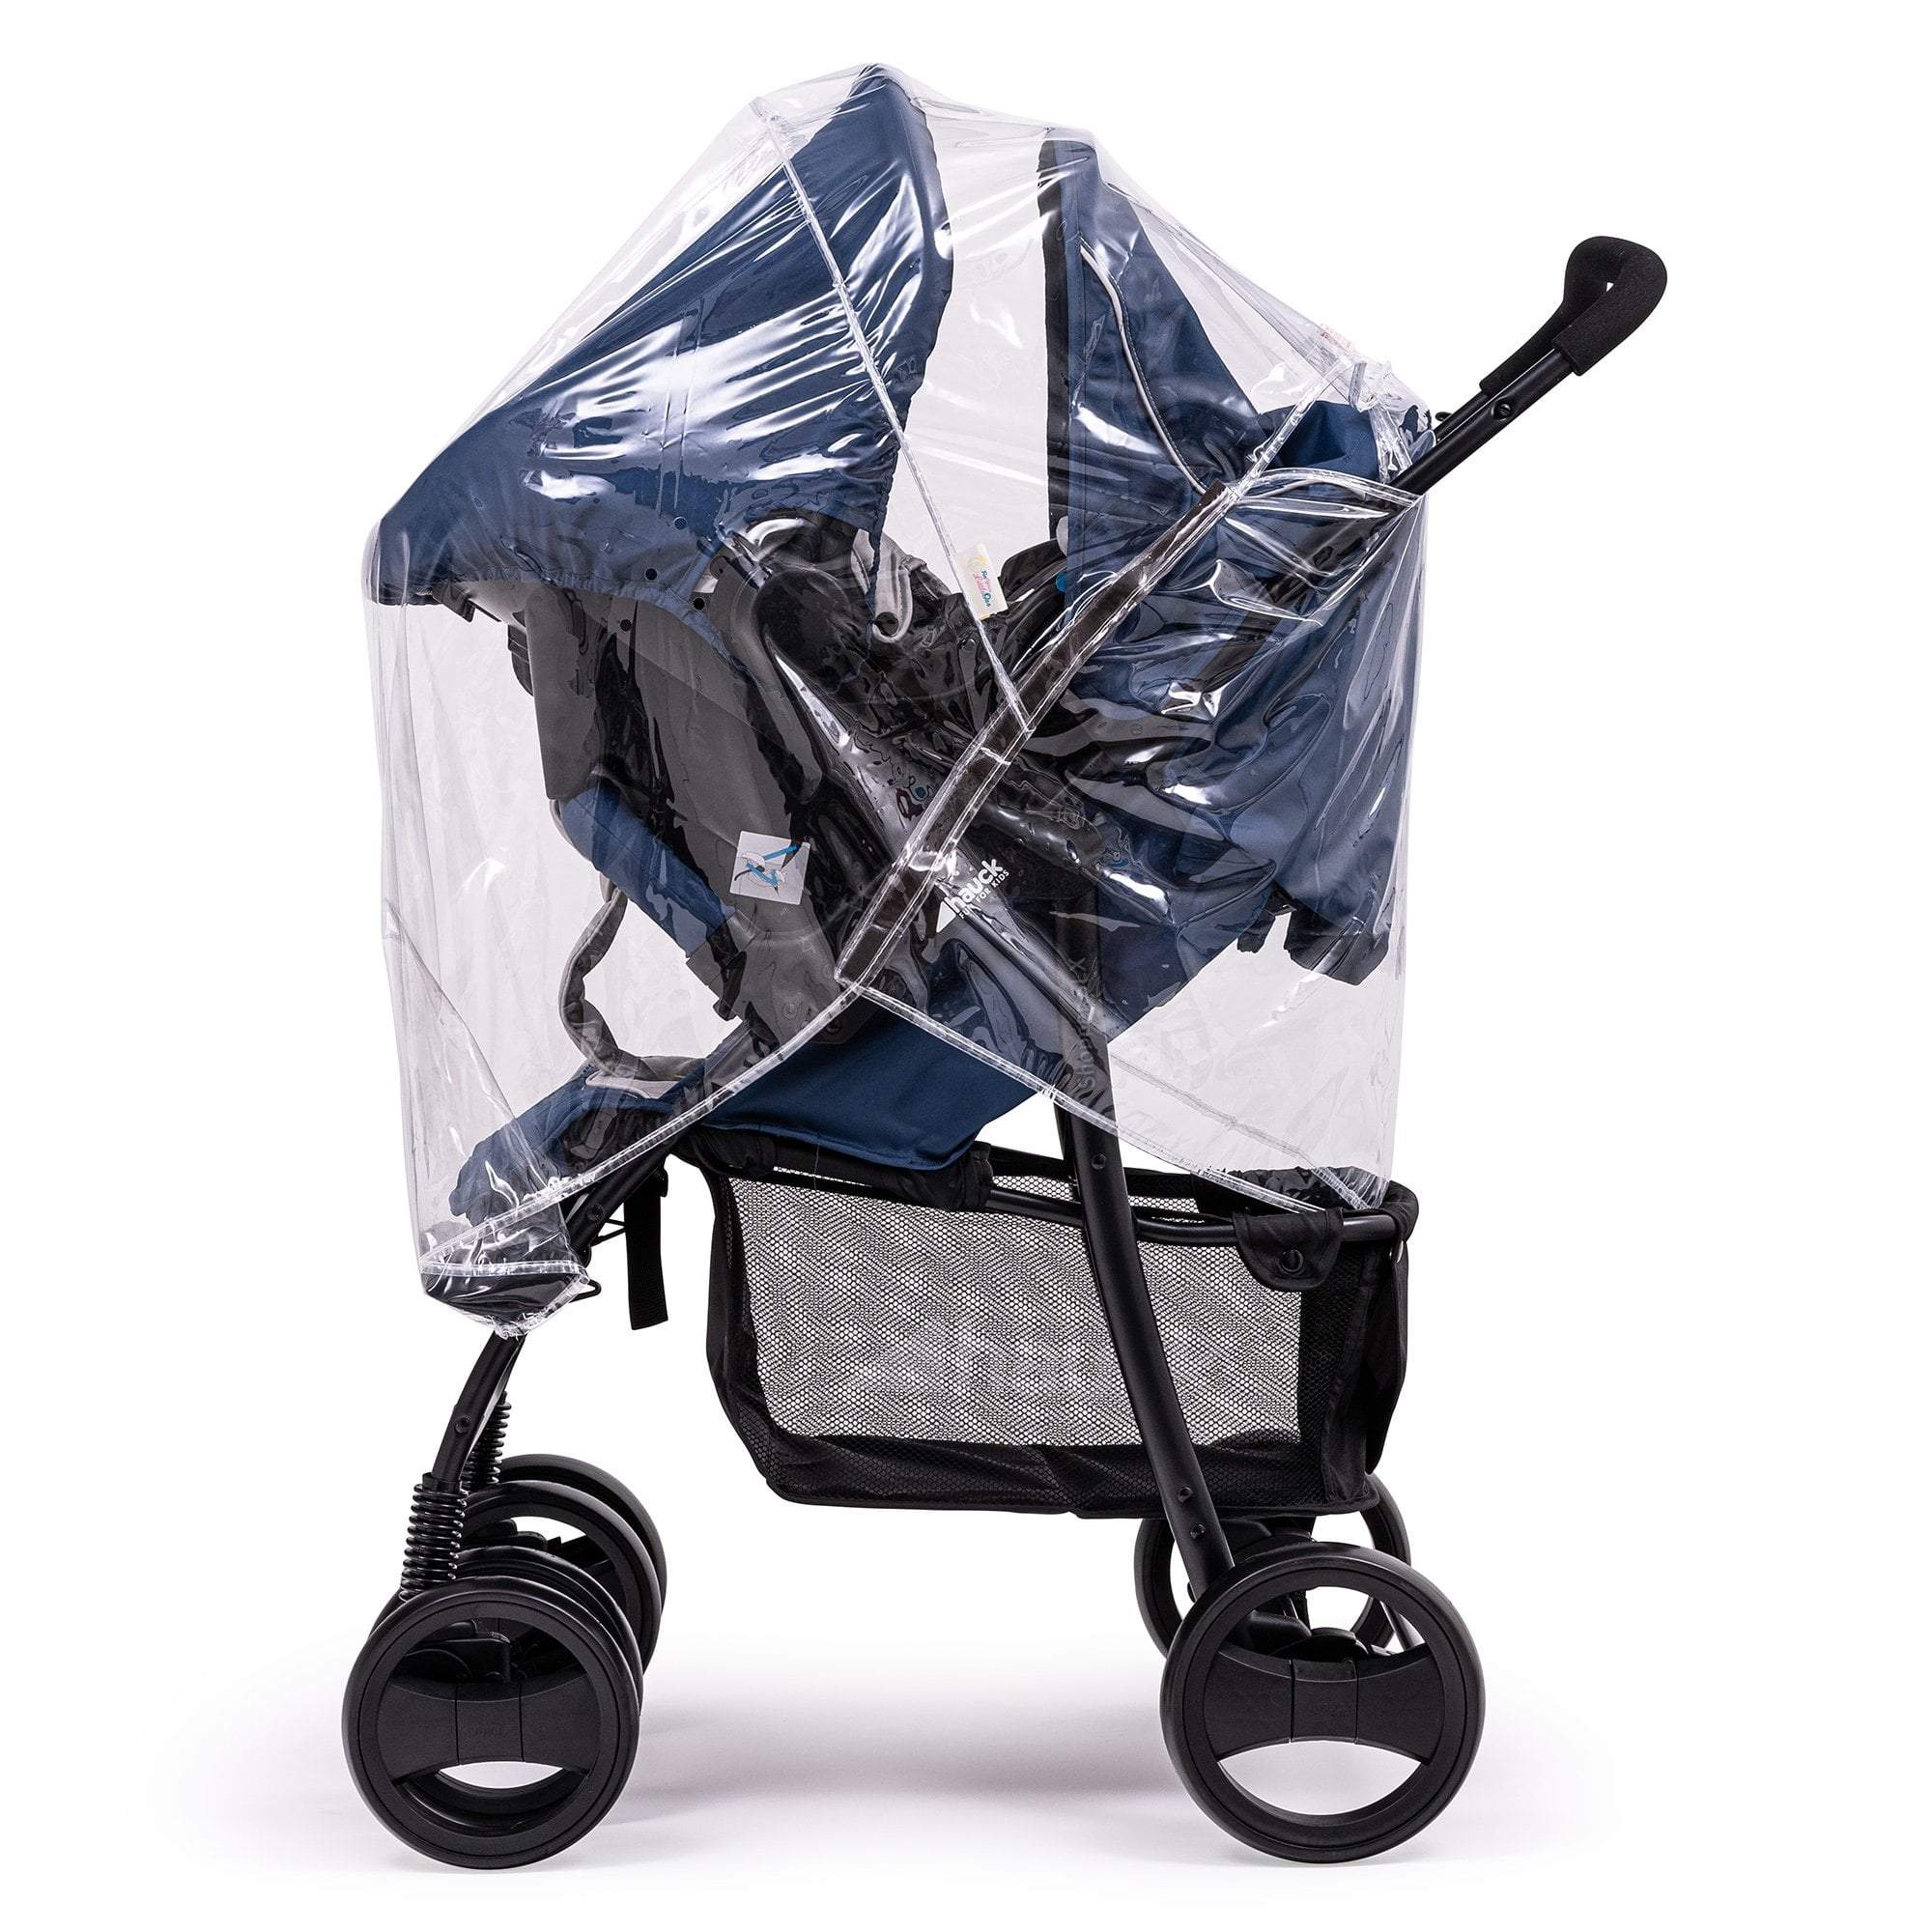 Travel System Raincover Compatible with ABC Design - Fits All Models - For Your Little One